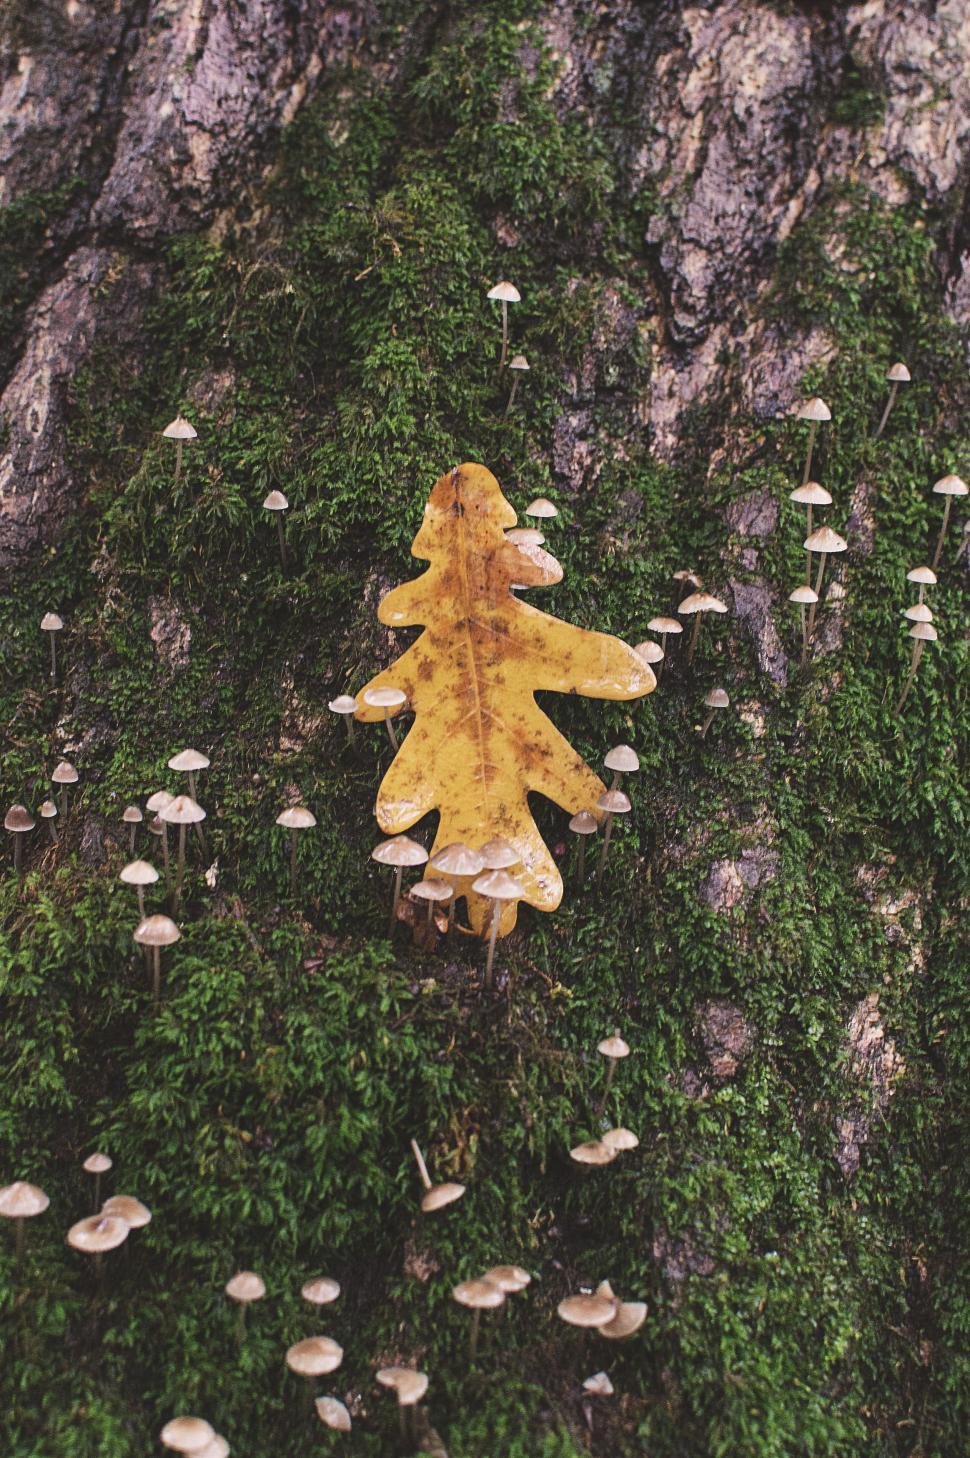 Free Image of Cluster of Mushrooms on Tree Trunk 